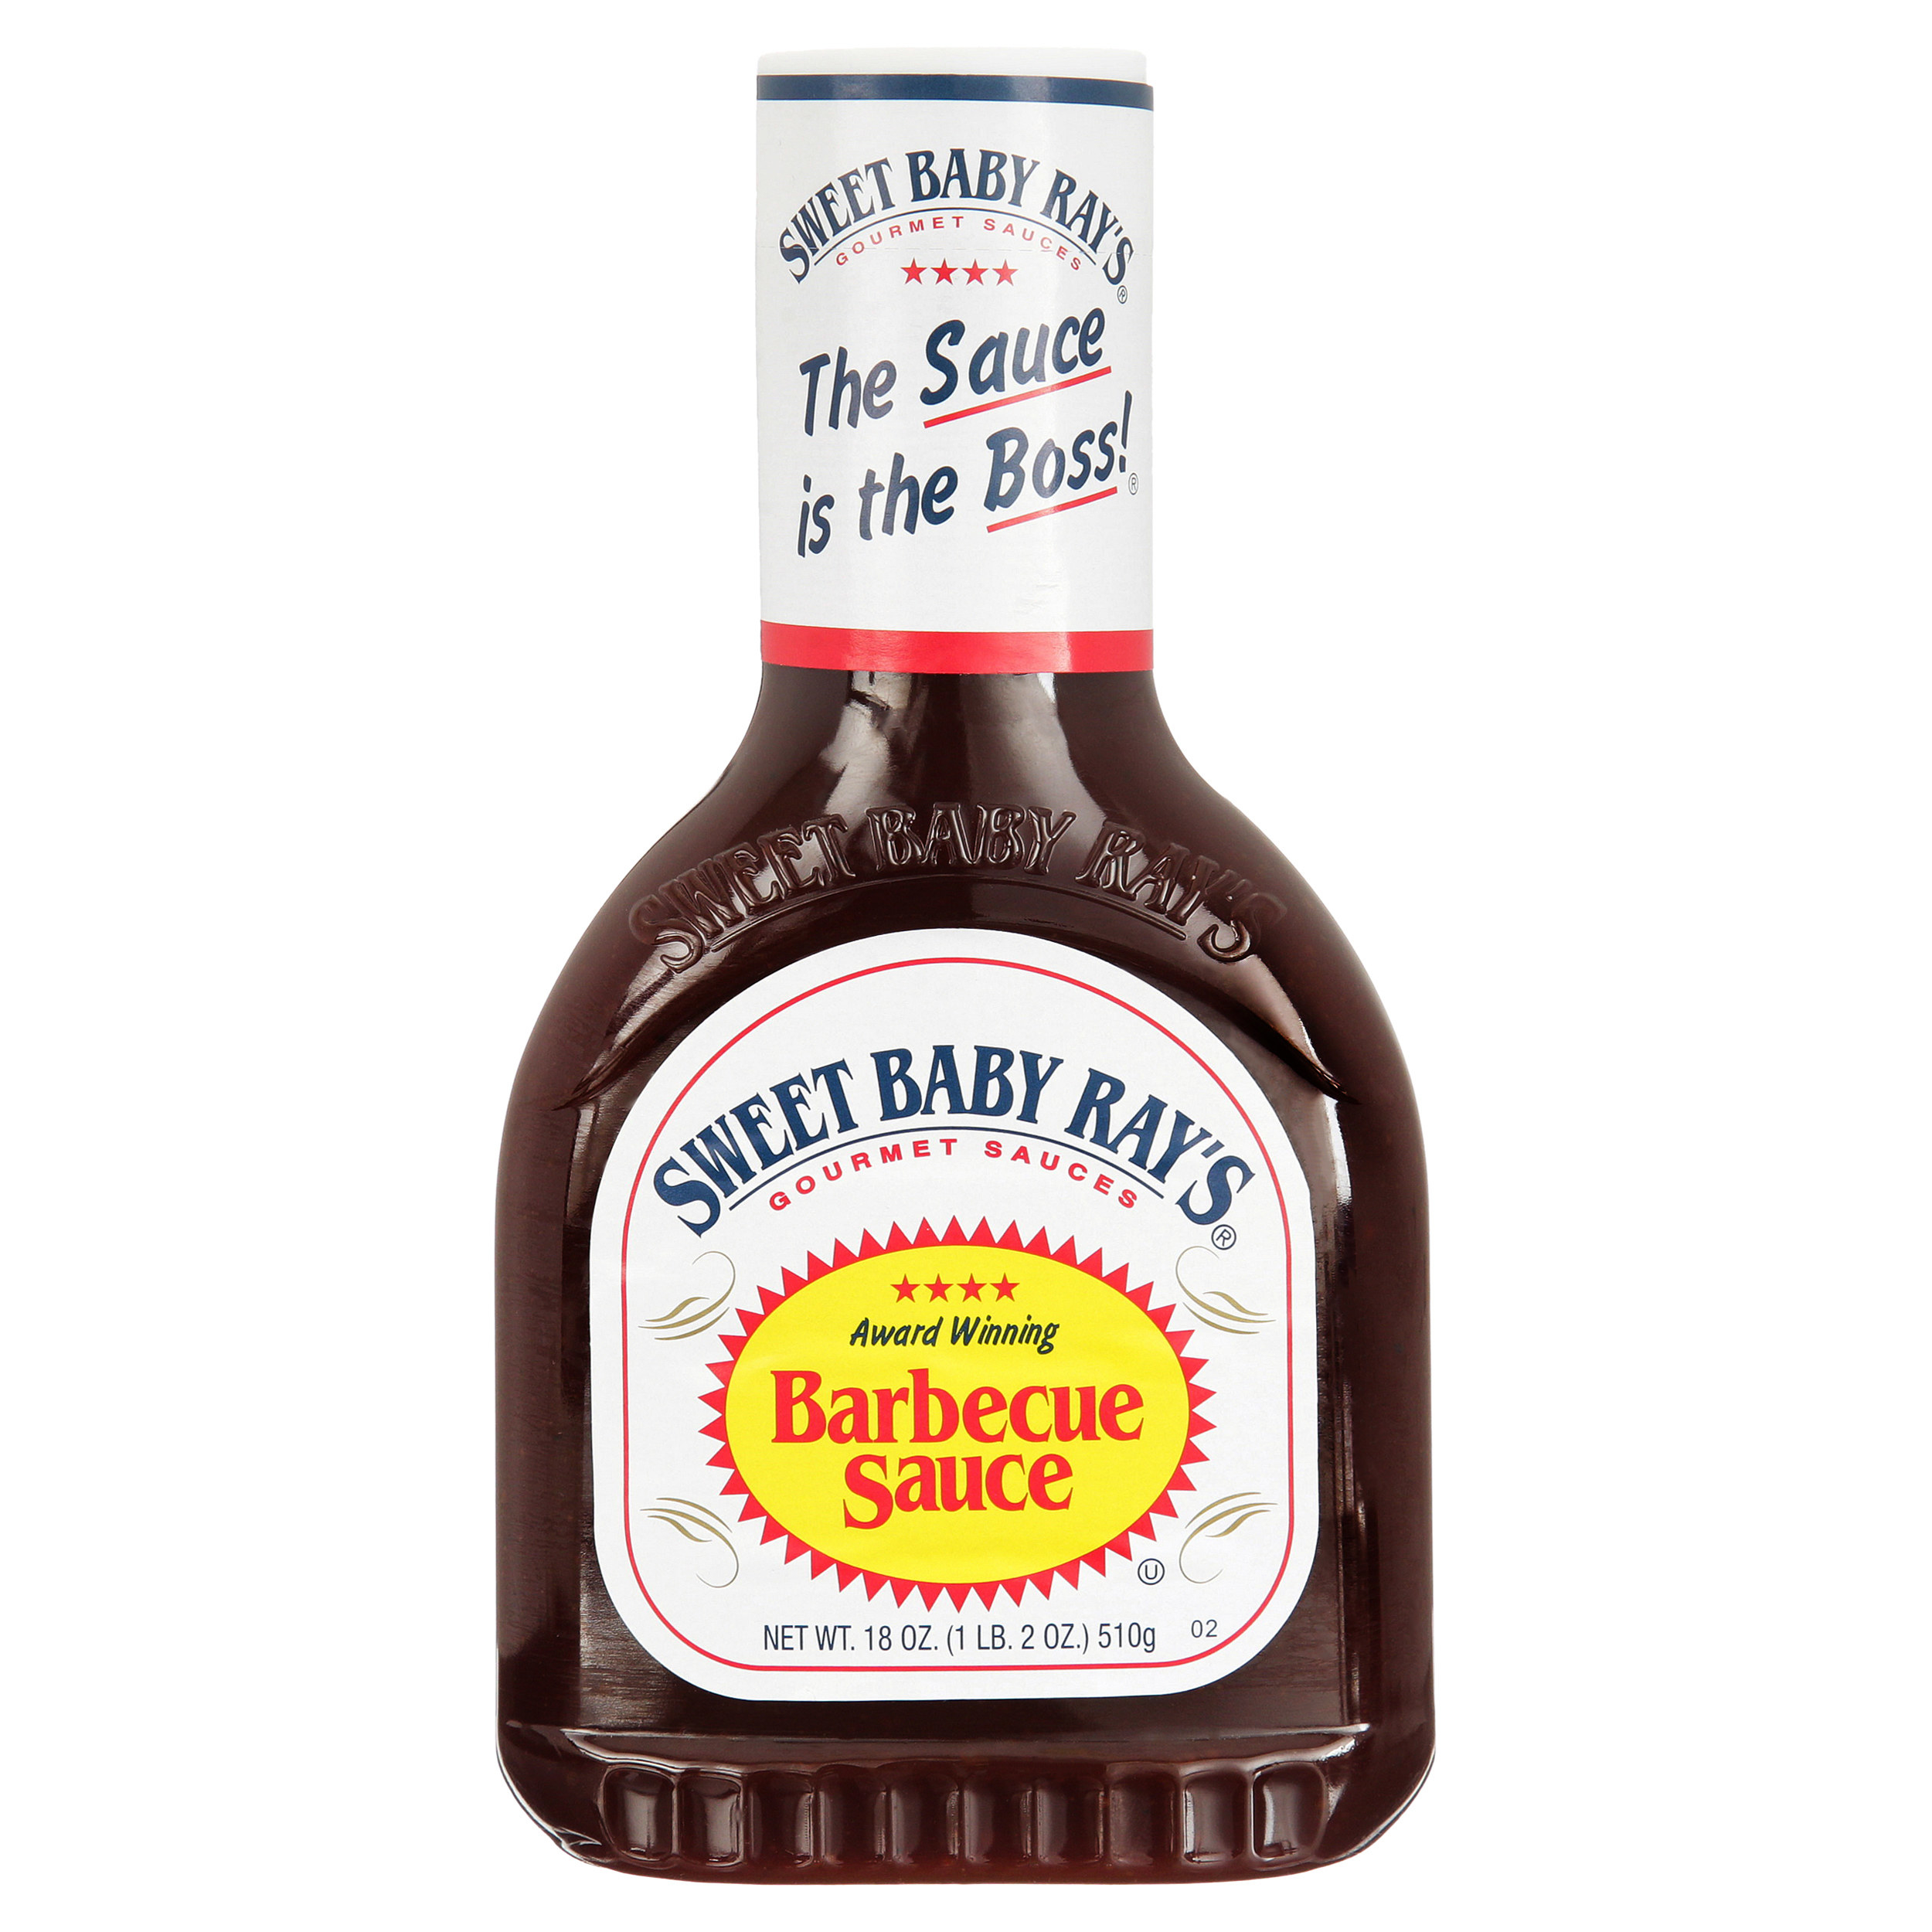 the bottle of barbecue sauce